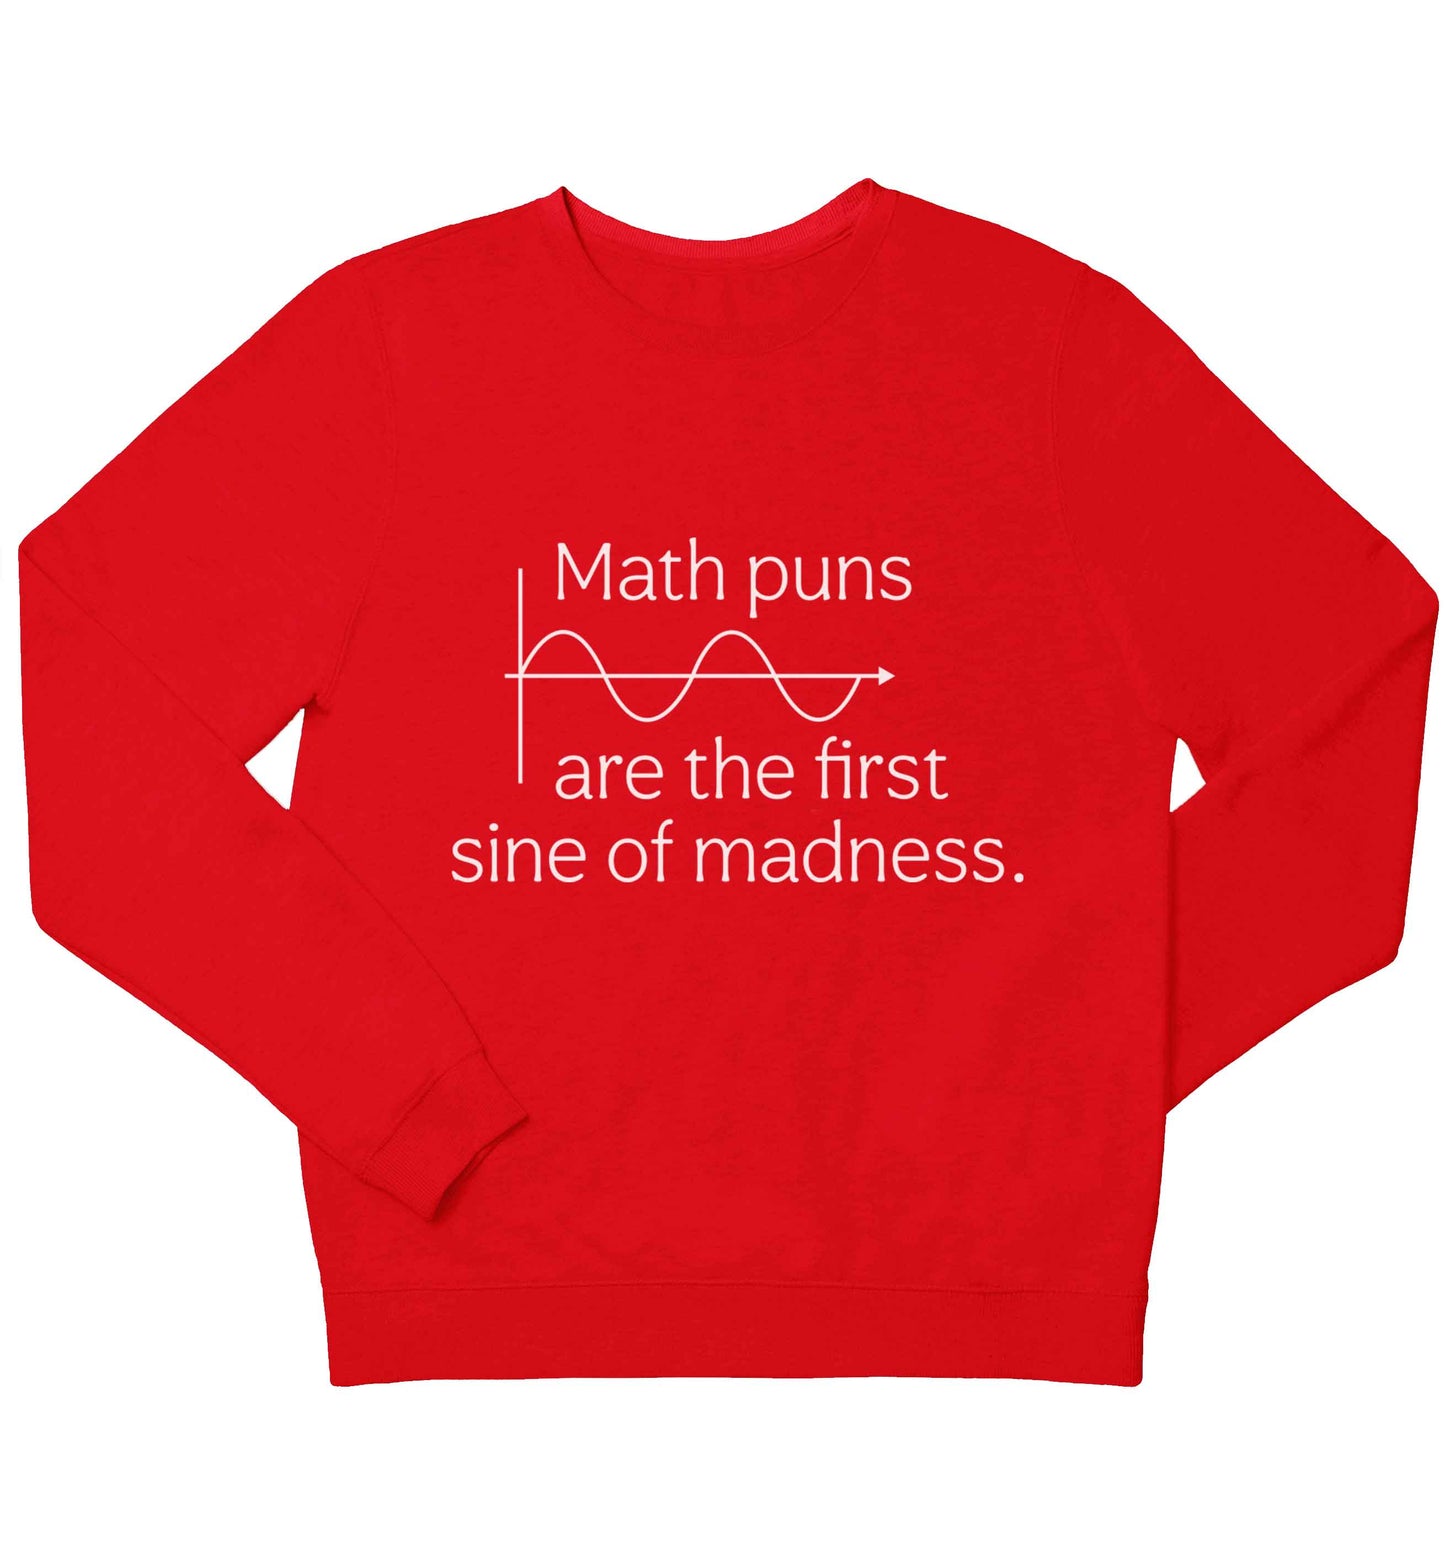 Math puns are the first sine of madness children's grey sweater 12-13 Years